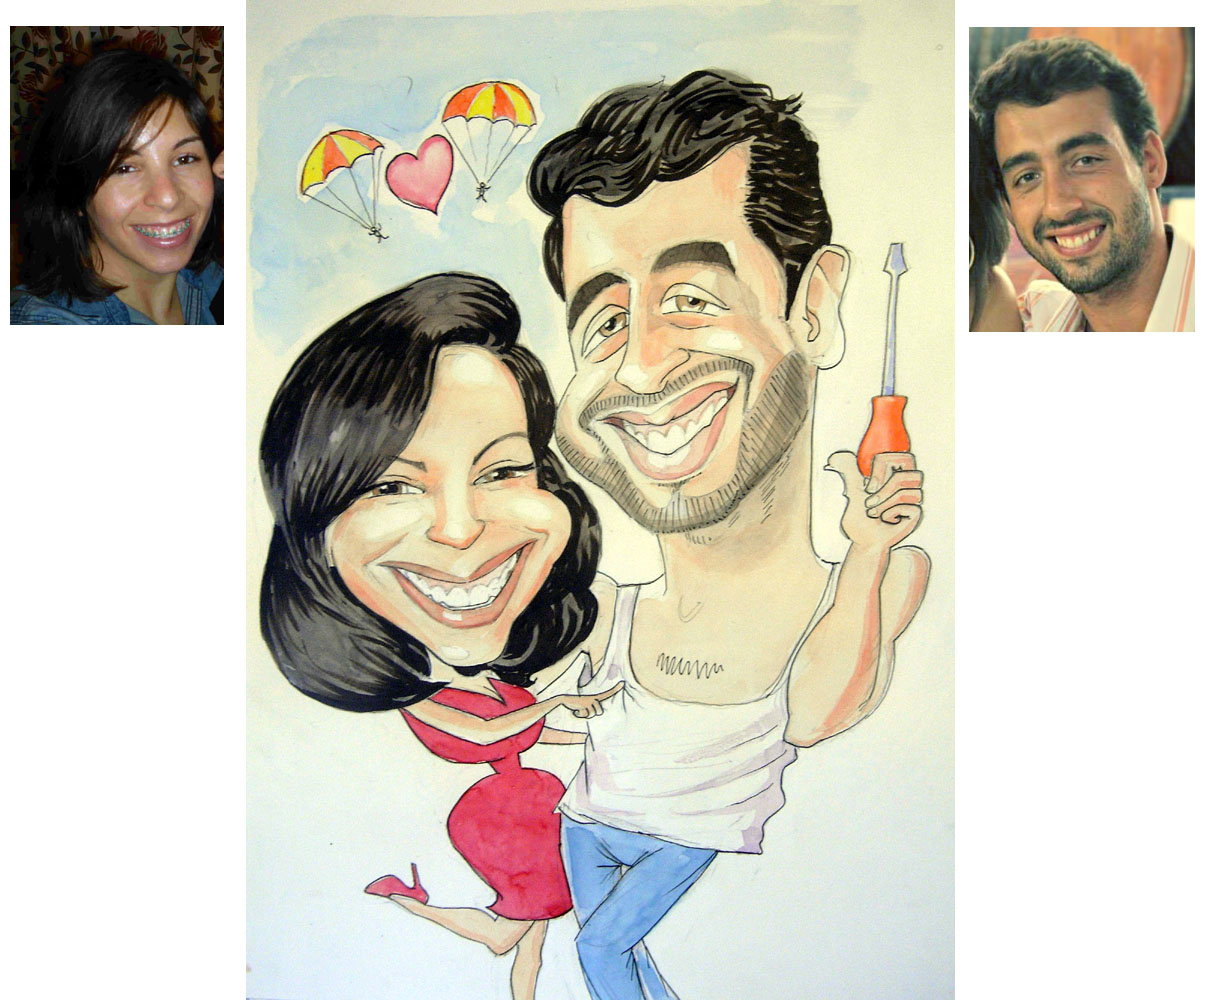 A chance to win a lovely caricature portrait of yourself and your partner this Valentine’s Day!